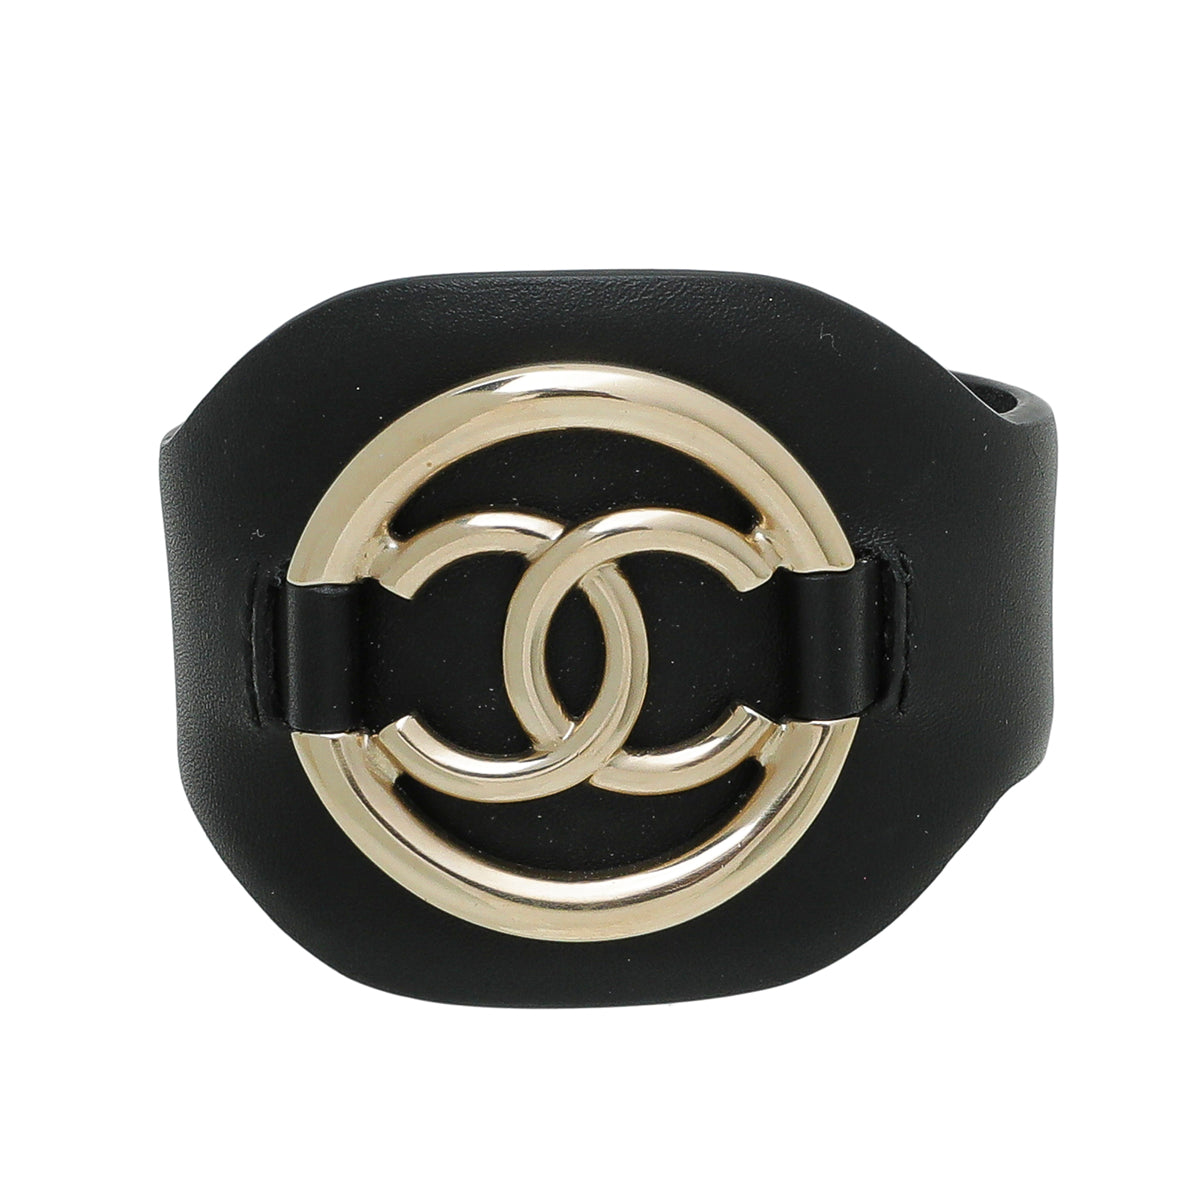 Vintage Chanel Cuff Bracelet 1980s Gold Toned Chain Black Leather